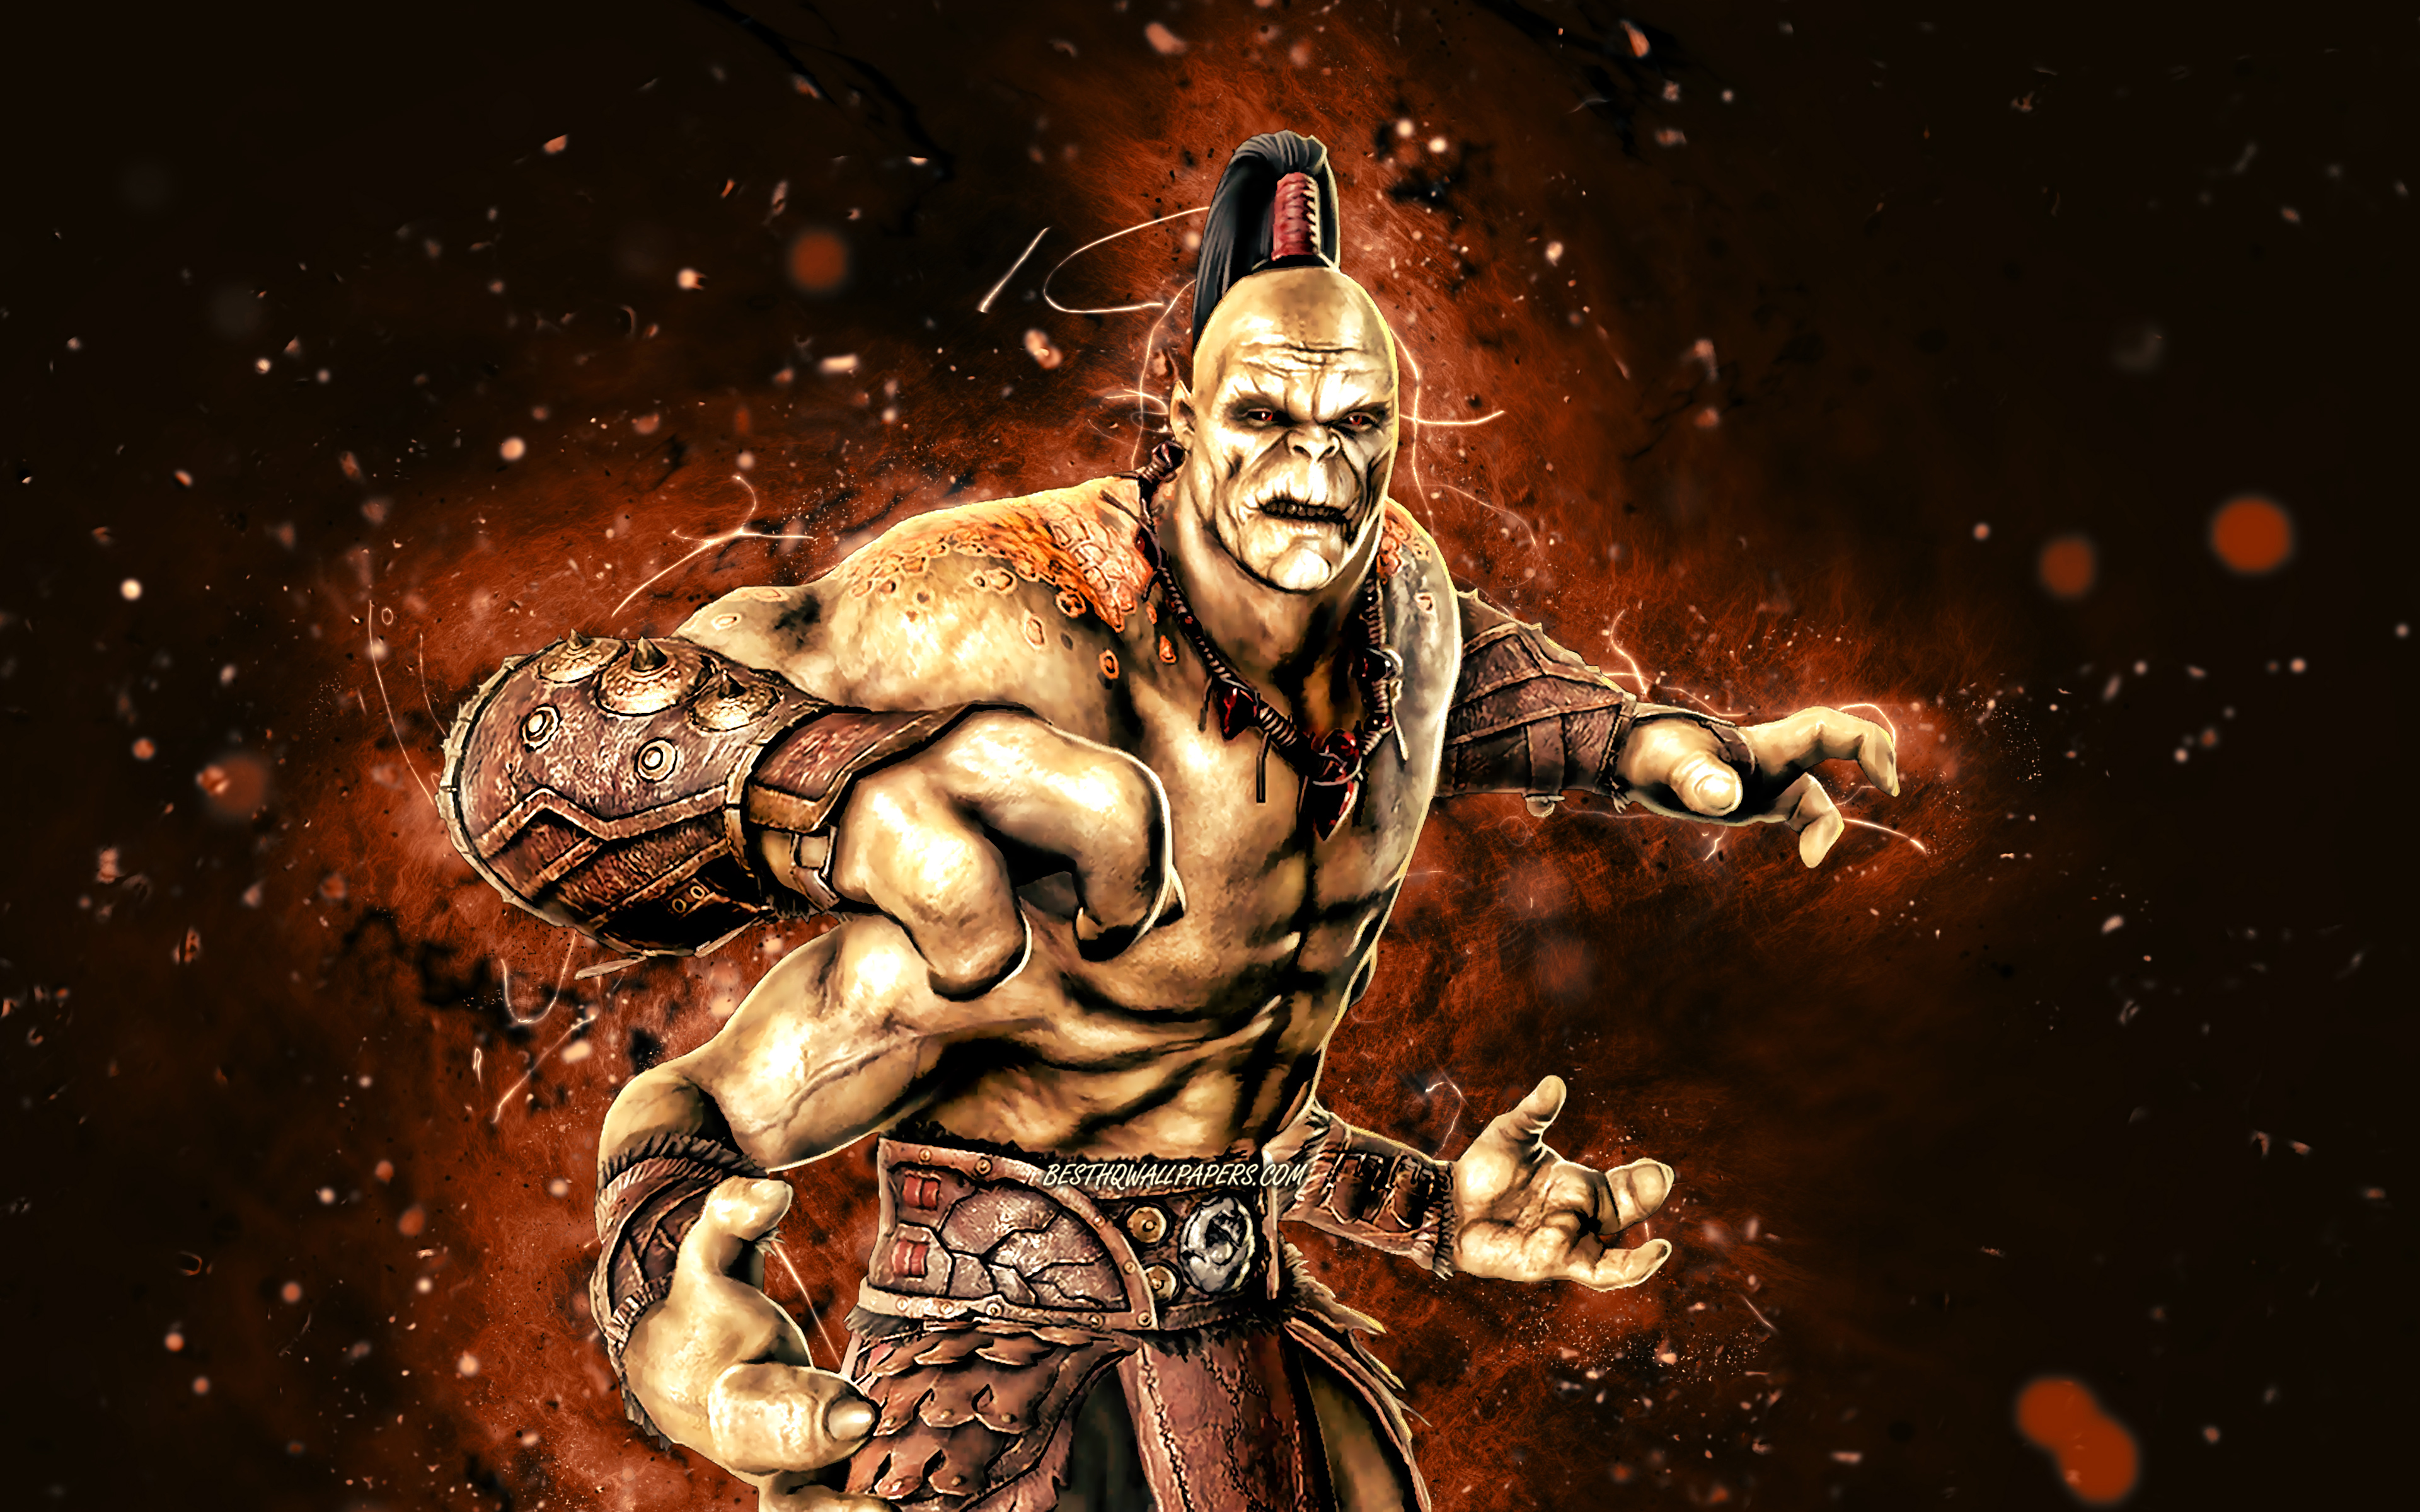 Download wallpaper Goro, 4k, brown neon lights, Mortal Kombat Mobile, fighting games, MK Mobile, creative, Mortal Kombat, Goro Mortal Kombat for desktop with resolution 3840x2400. High Quality HD picture wallpaper